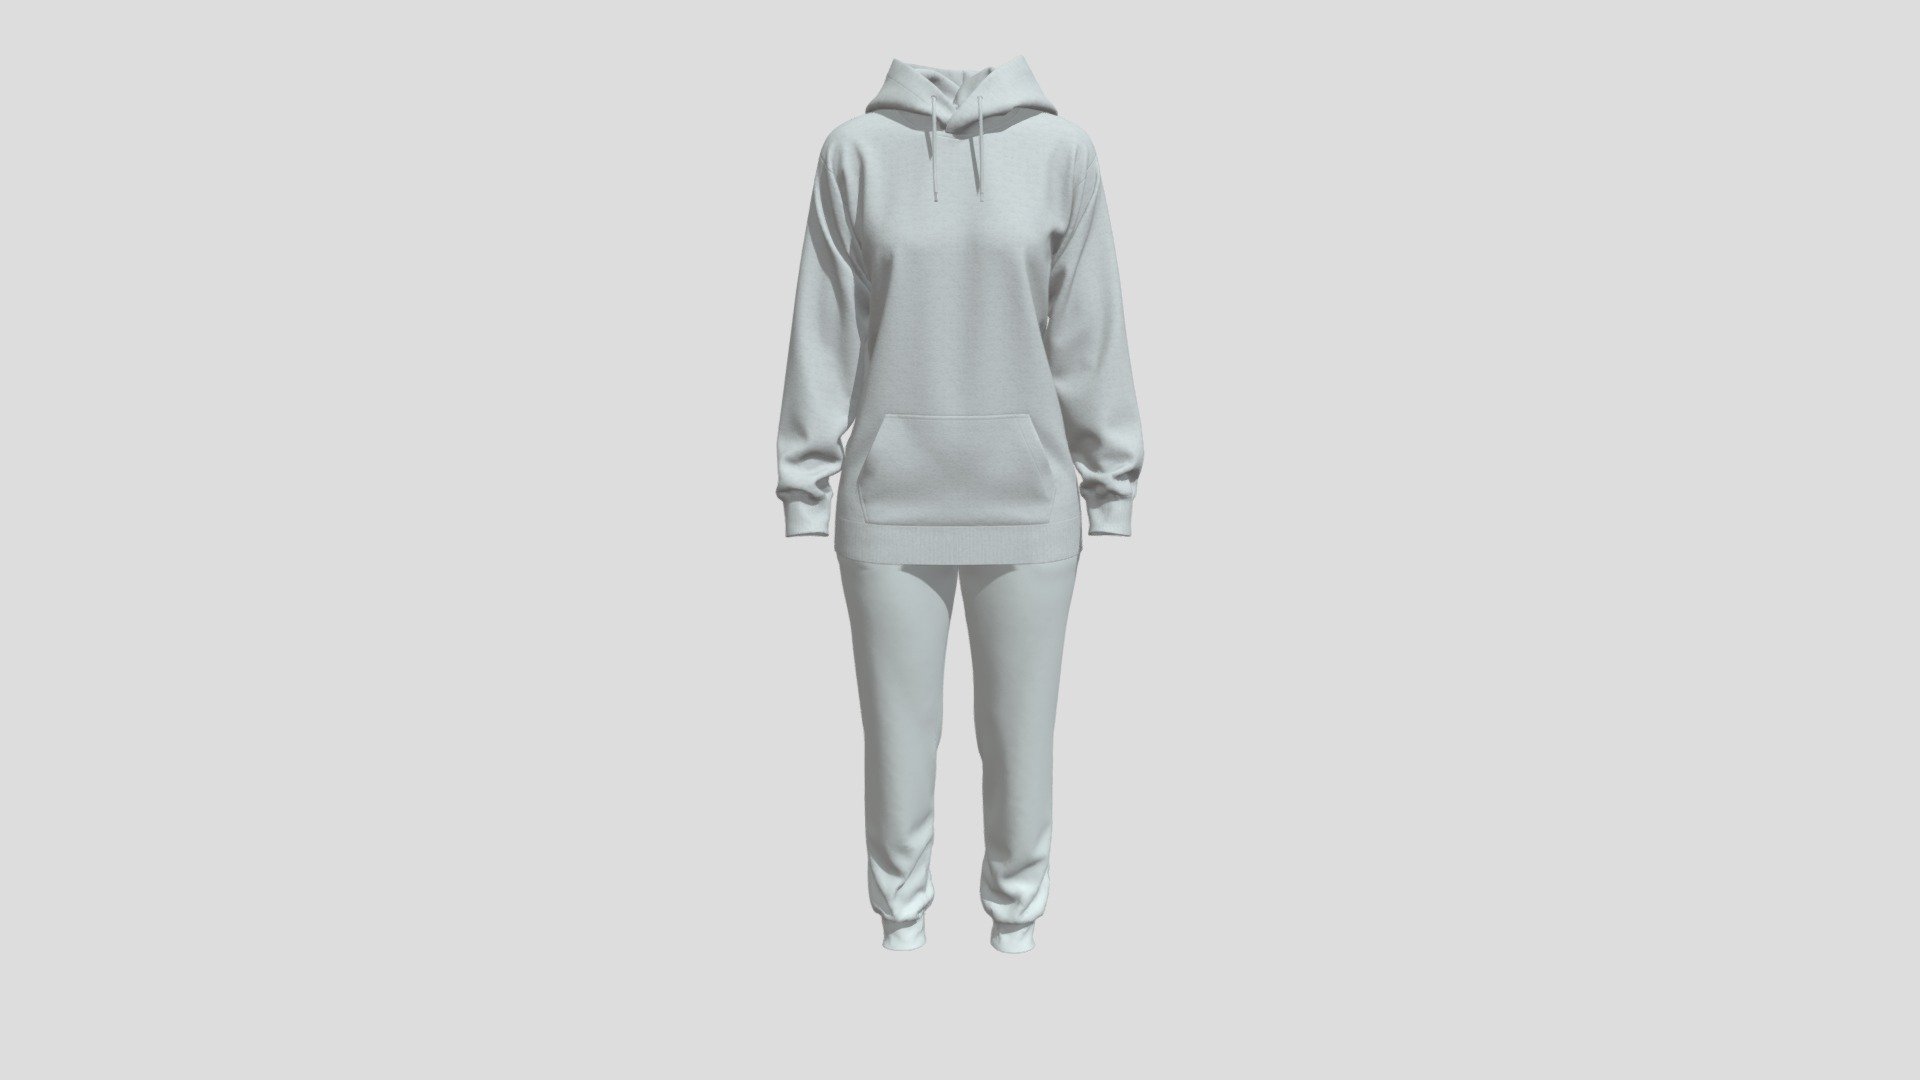 High poly thick mesh only

Not retopologized

Seamline, topstitch and puckering (if any) as textures

UV arranged and exported as unified UV

Garment is in attention/natural pose as in preview. Marvelous Designer/Clo is needed to edit pose.

Attachment include:




Native .zprj files from Clo

obj file of garment

obj file of garment with avatar/figure

fbx file of garment

glb file of garment

UV maps and all textures

The provided zprj file can be use in both MD and Clo but please use the latest version because newer avatar may not be compatible with older version 3d model